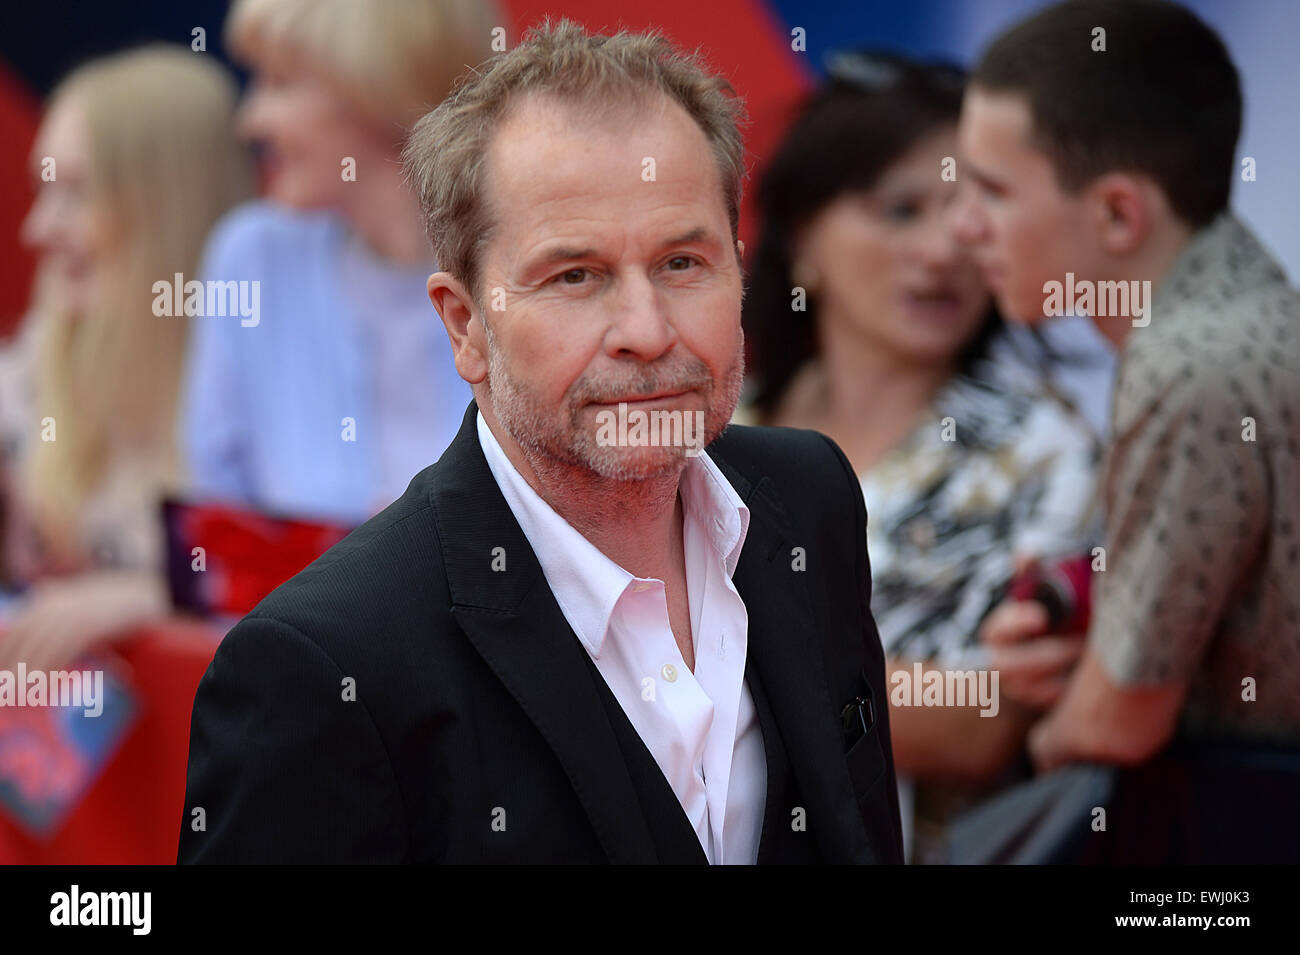 Moscow, Russia. 26th June, 2015. Austrian director Ulrich Seidl attends the closing ceremony of 37th Moscow International Film Festival in Moscow, Russia, June 26, 2015. © Pavel Bednyakov/Xinhua/Alamy Live News Stock Photo